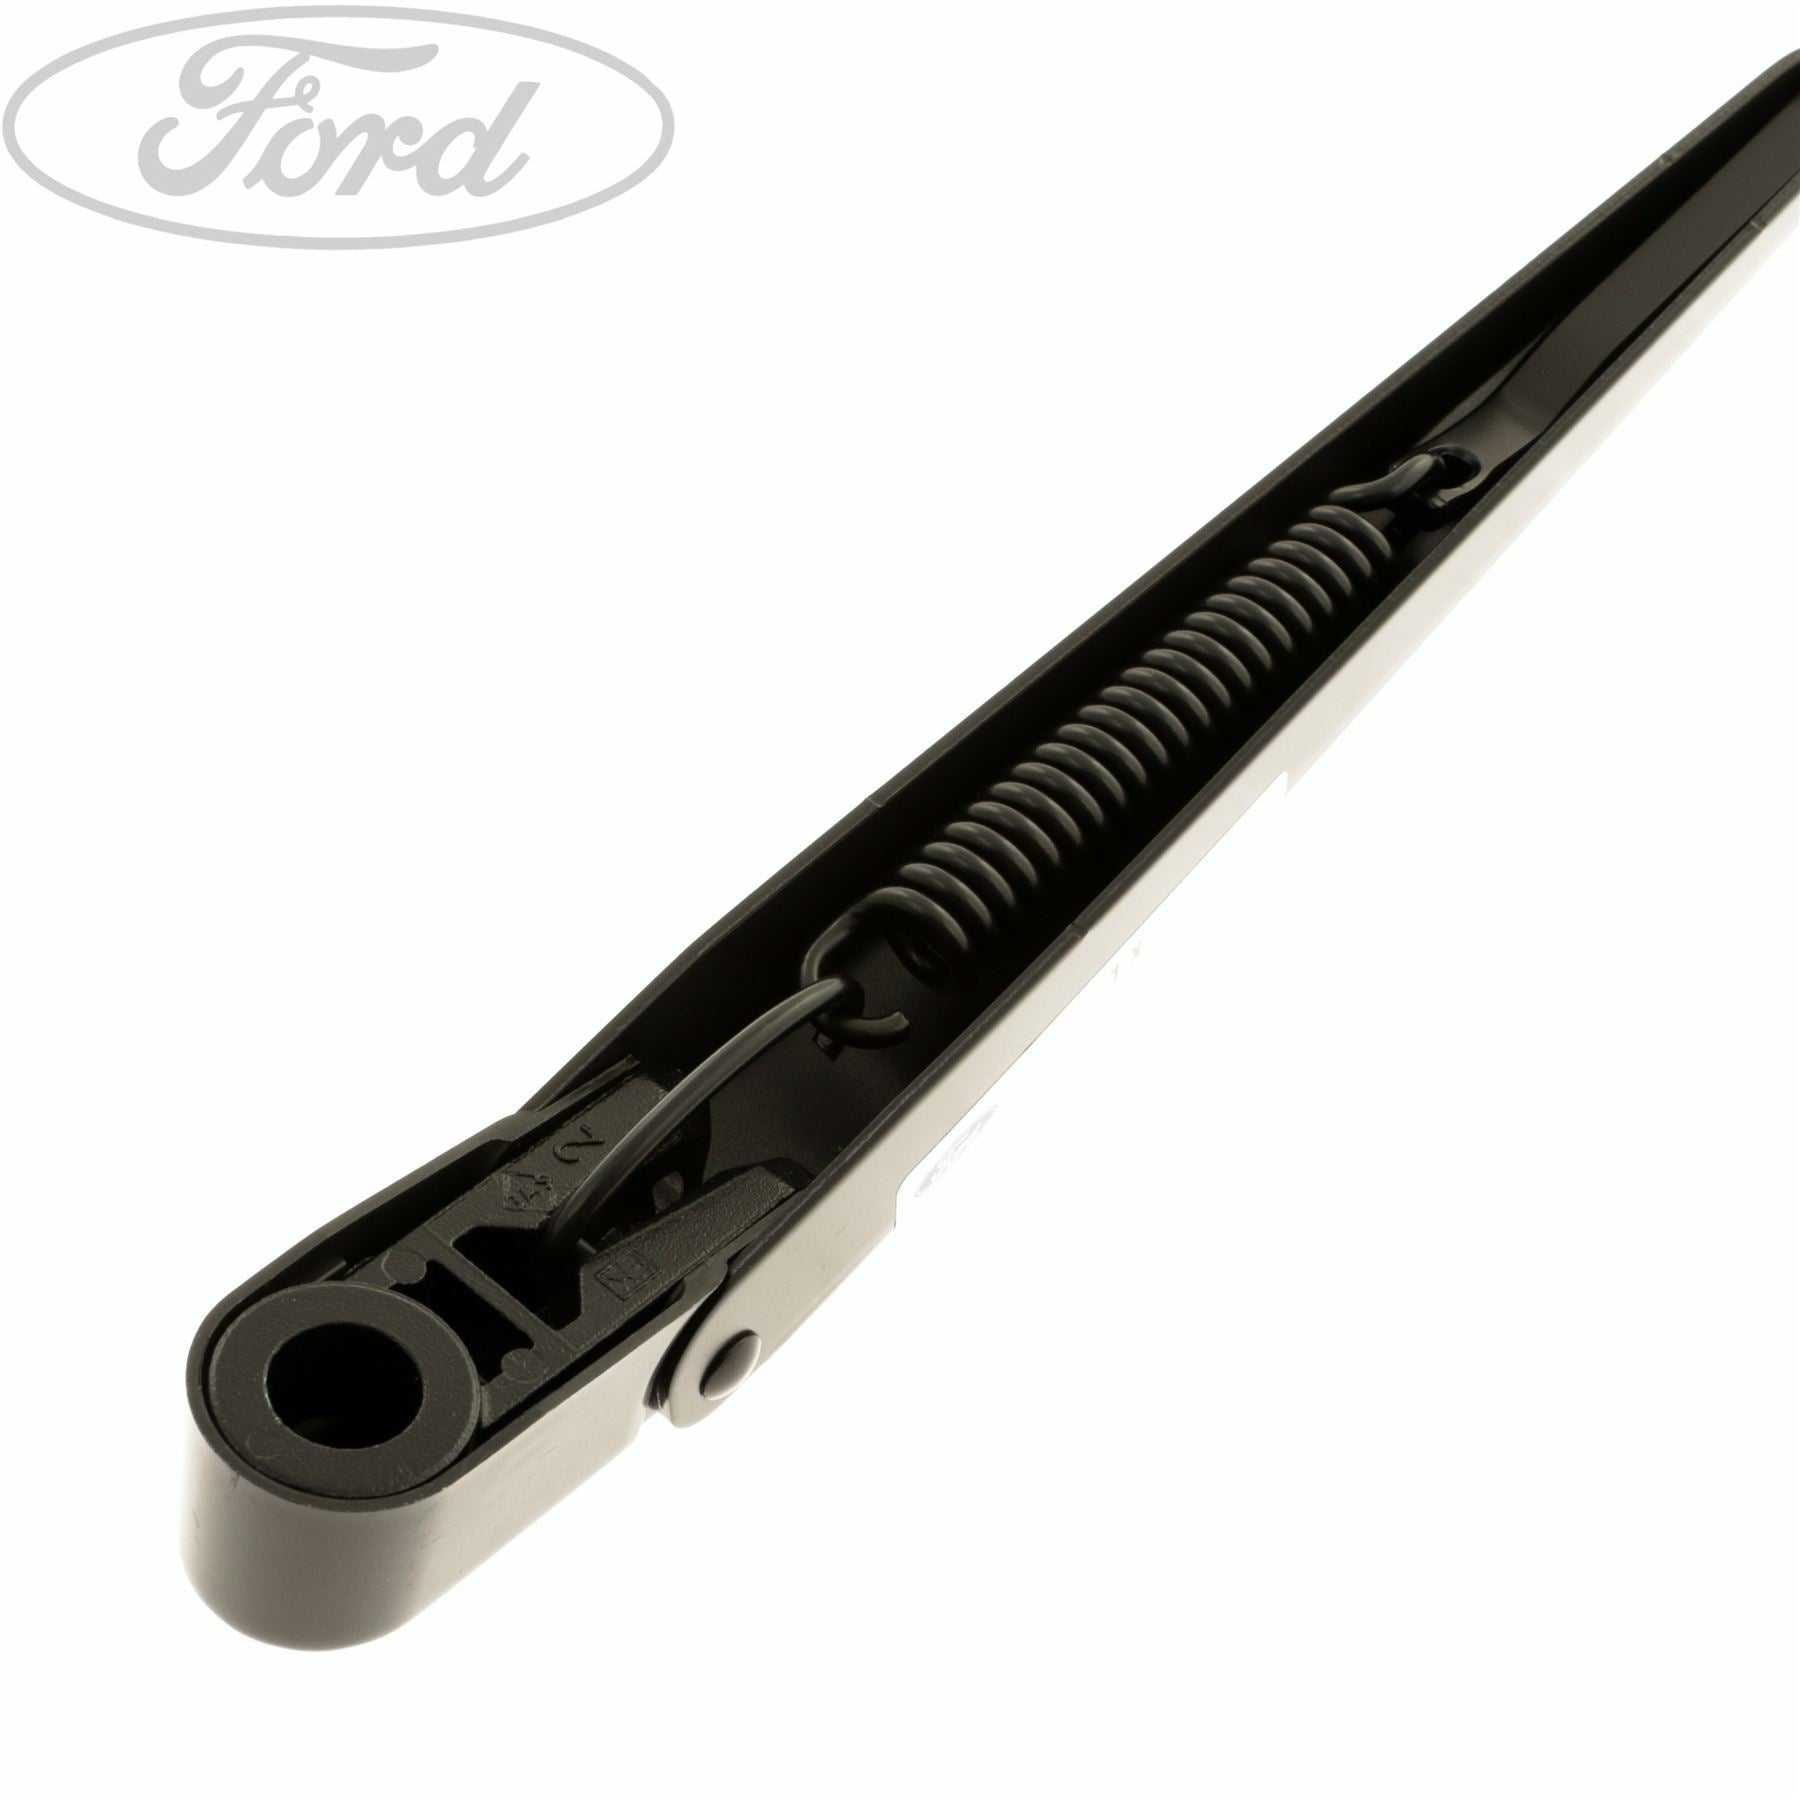 Ford, TRANSIT FRONT N/S WIPER ARM